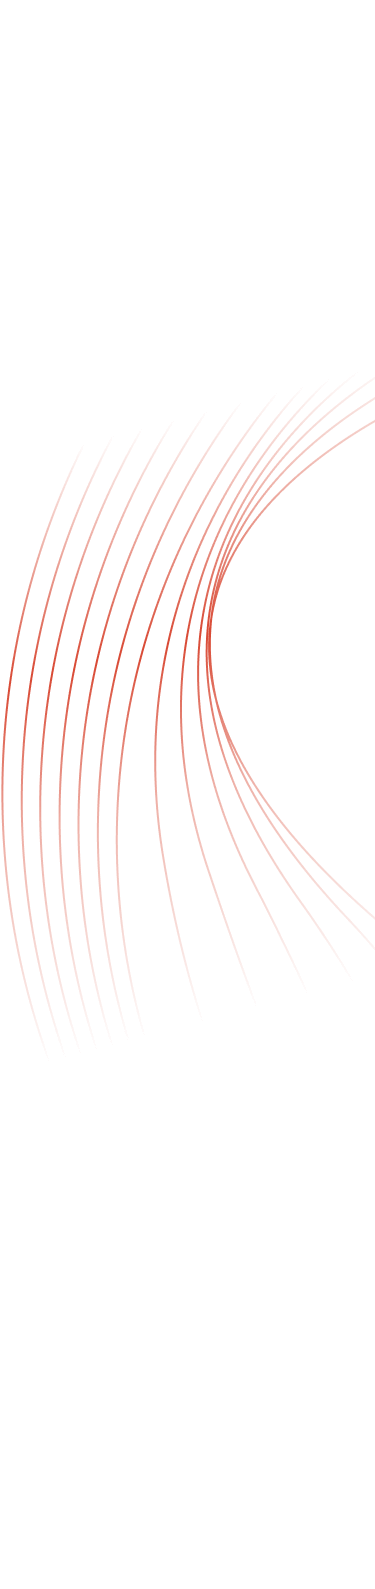 lines-background-image